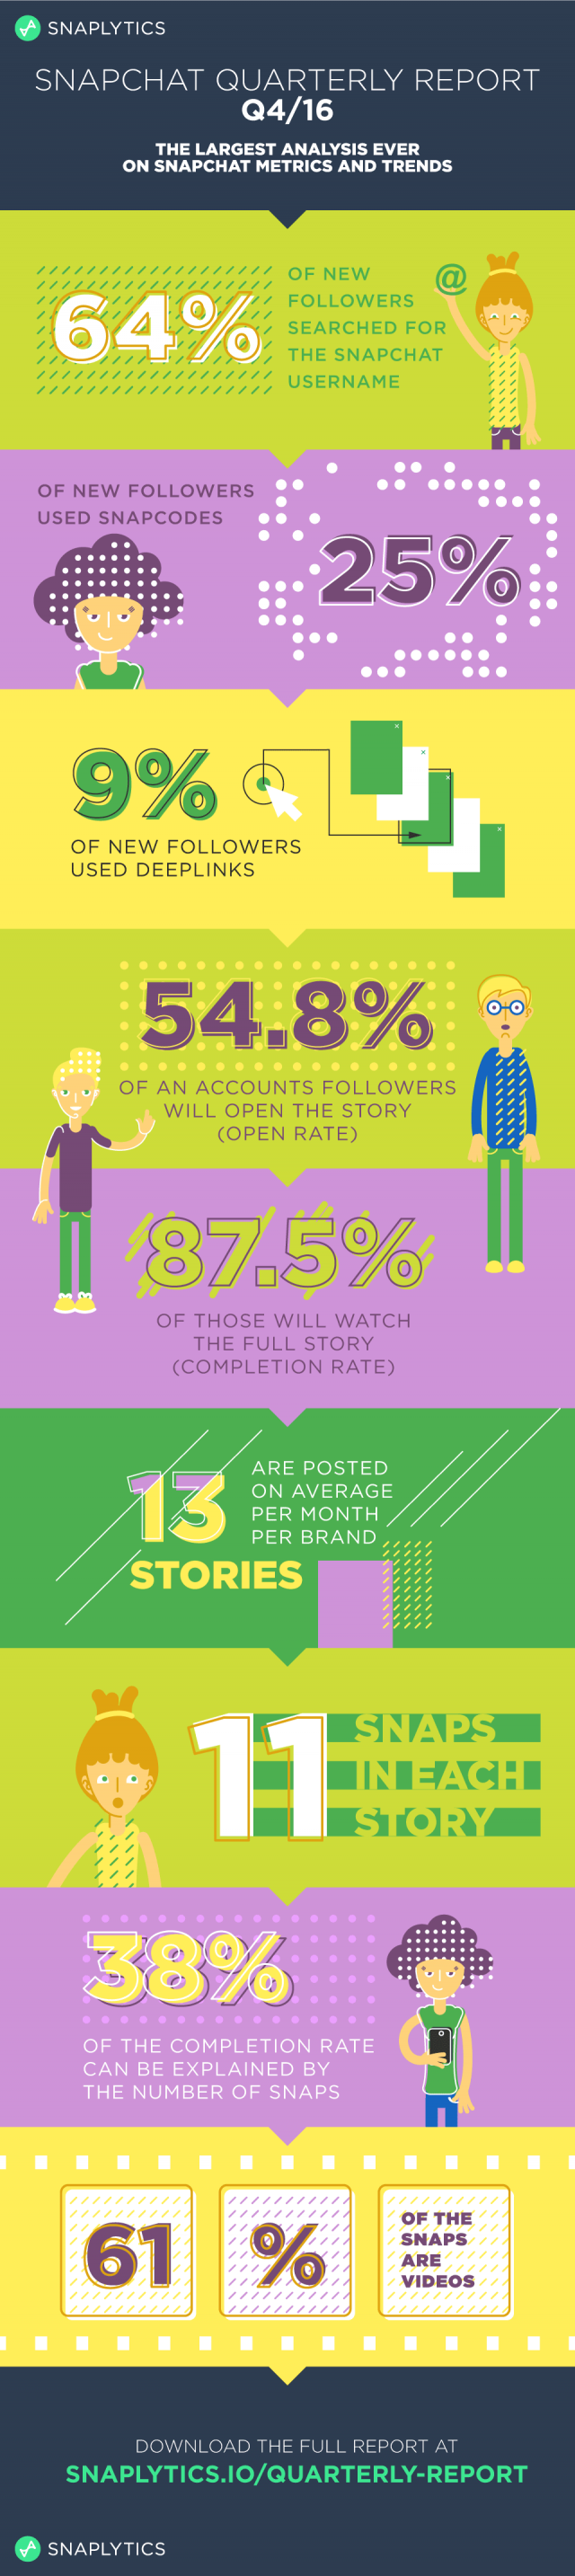 The Future of Marketing on Snapchat Is Video [Infographic]